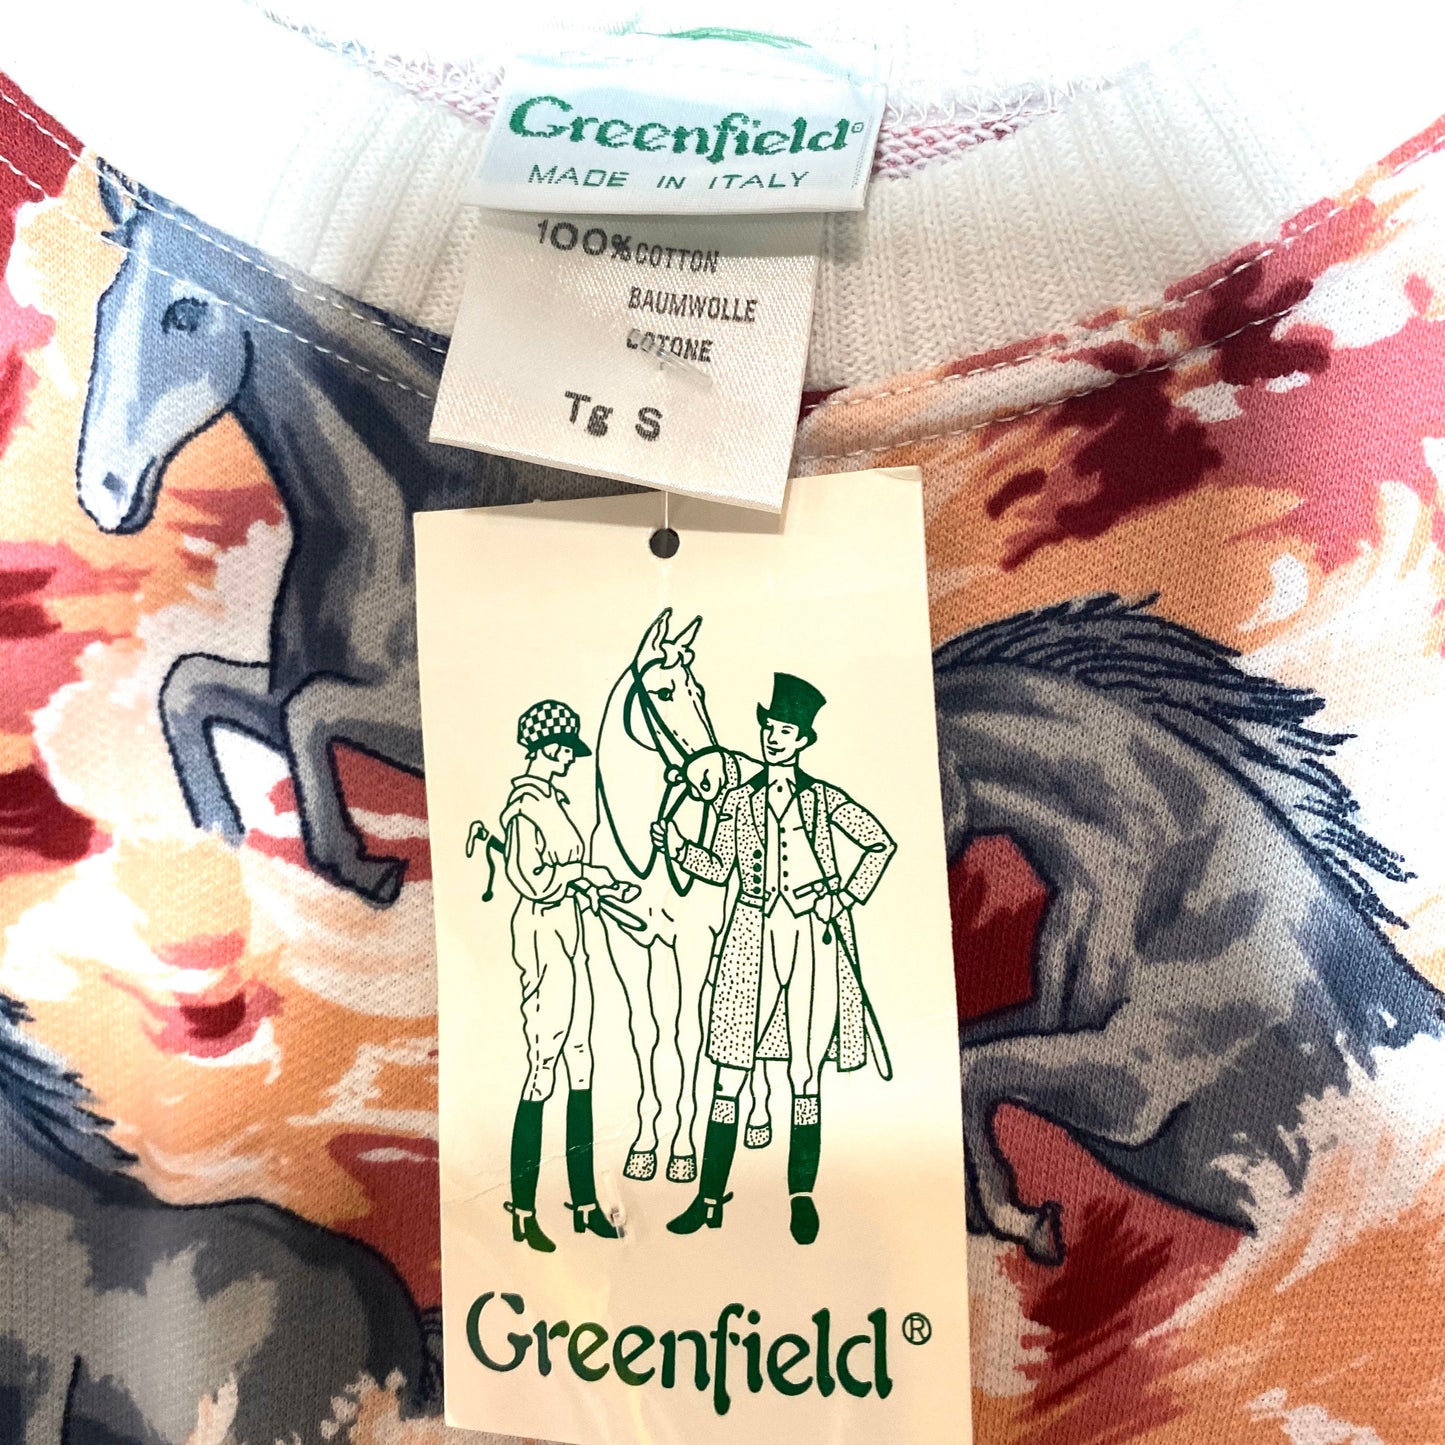 Greenfield coolest short sleeved sweatshirt with horses wading pink waves, 1980s NWT sz S,L